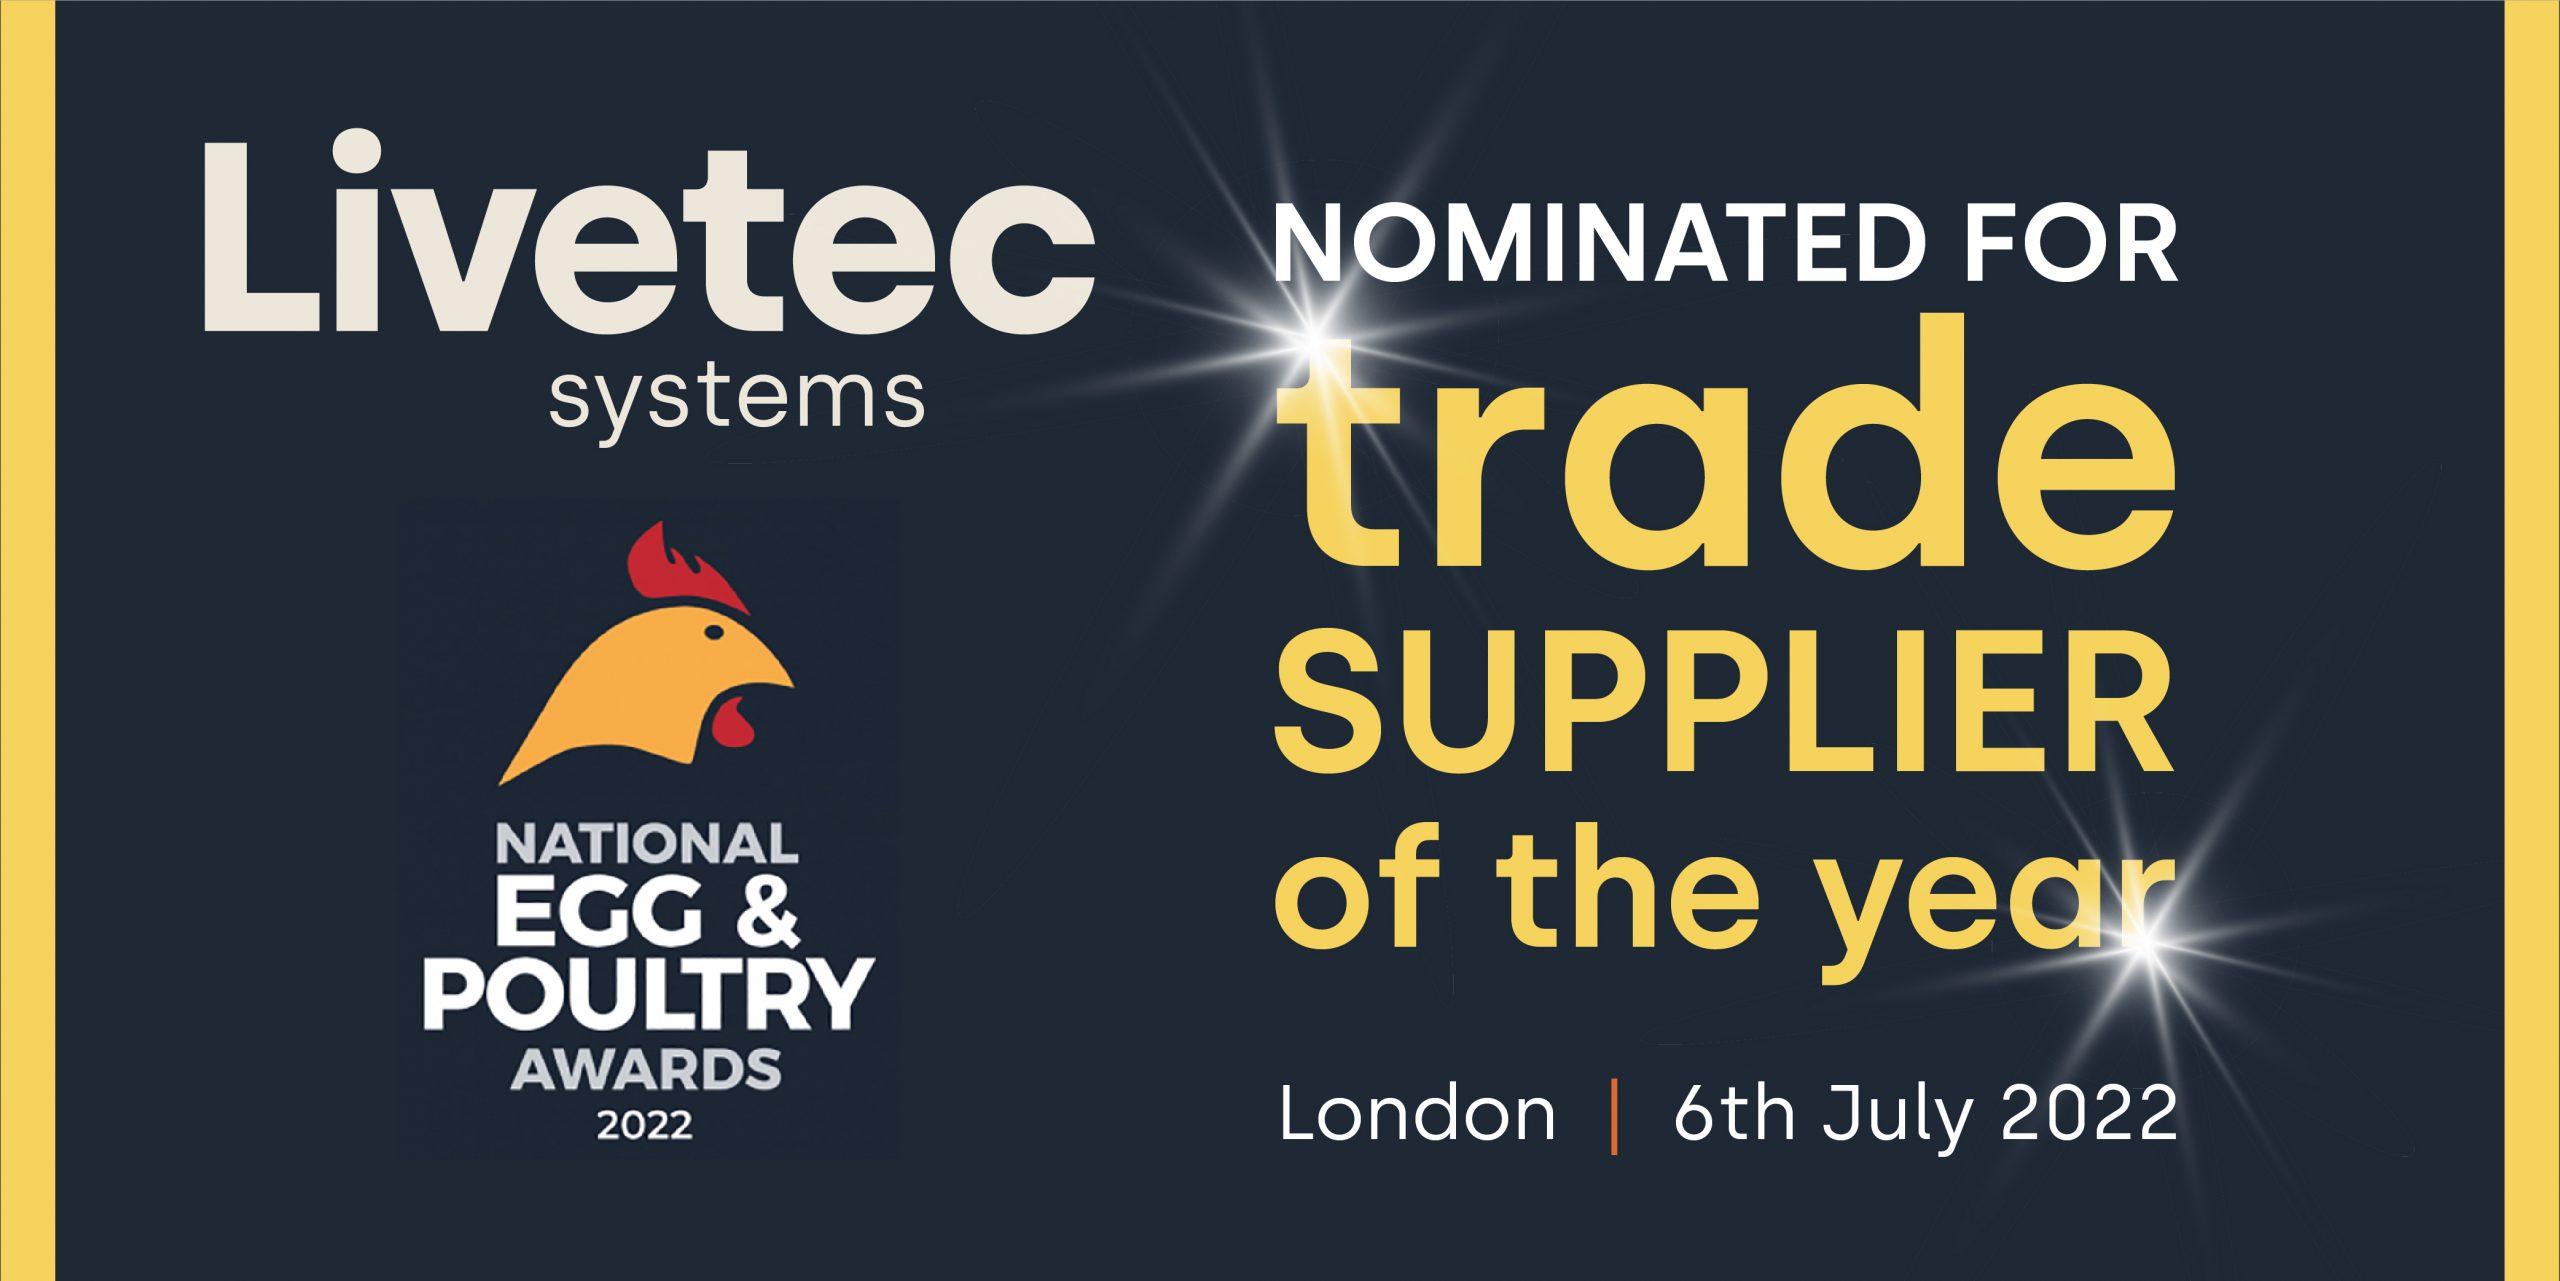 Livetec | National Egg and Poultry Awards | Trade Supplier of the Year